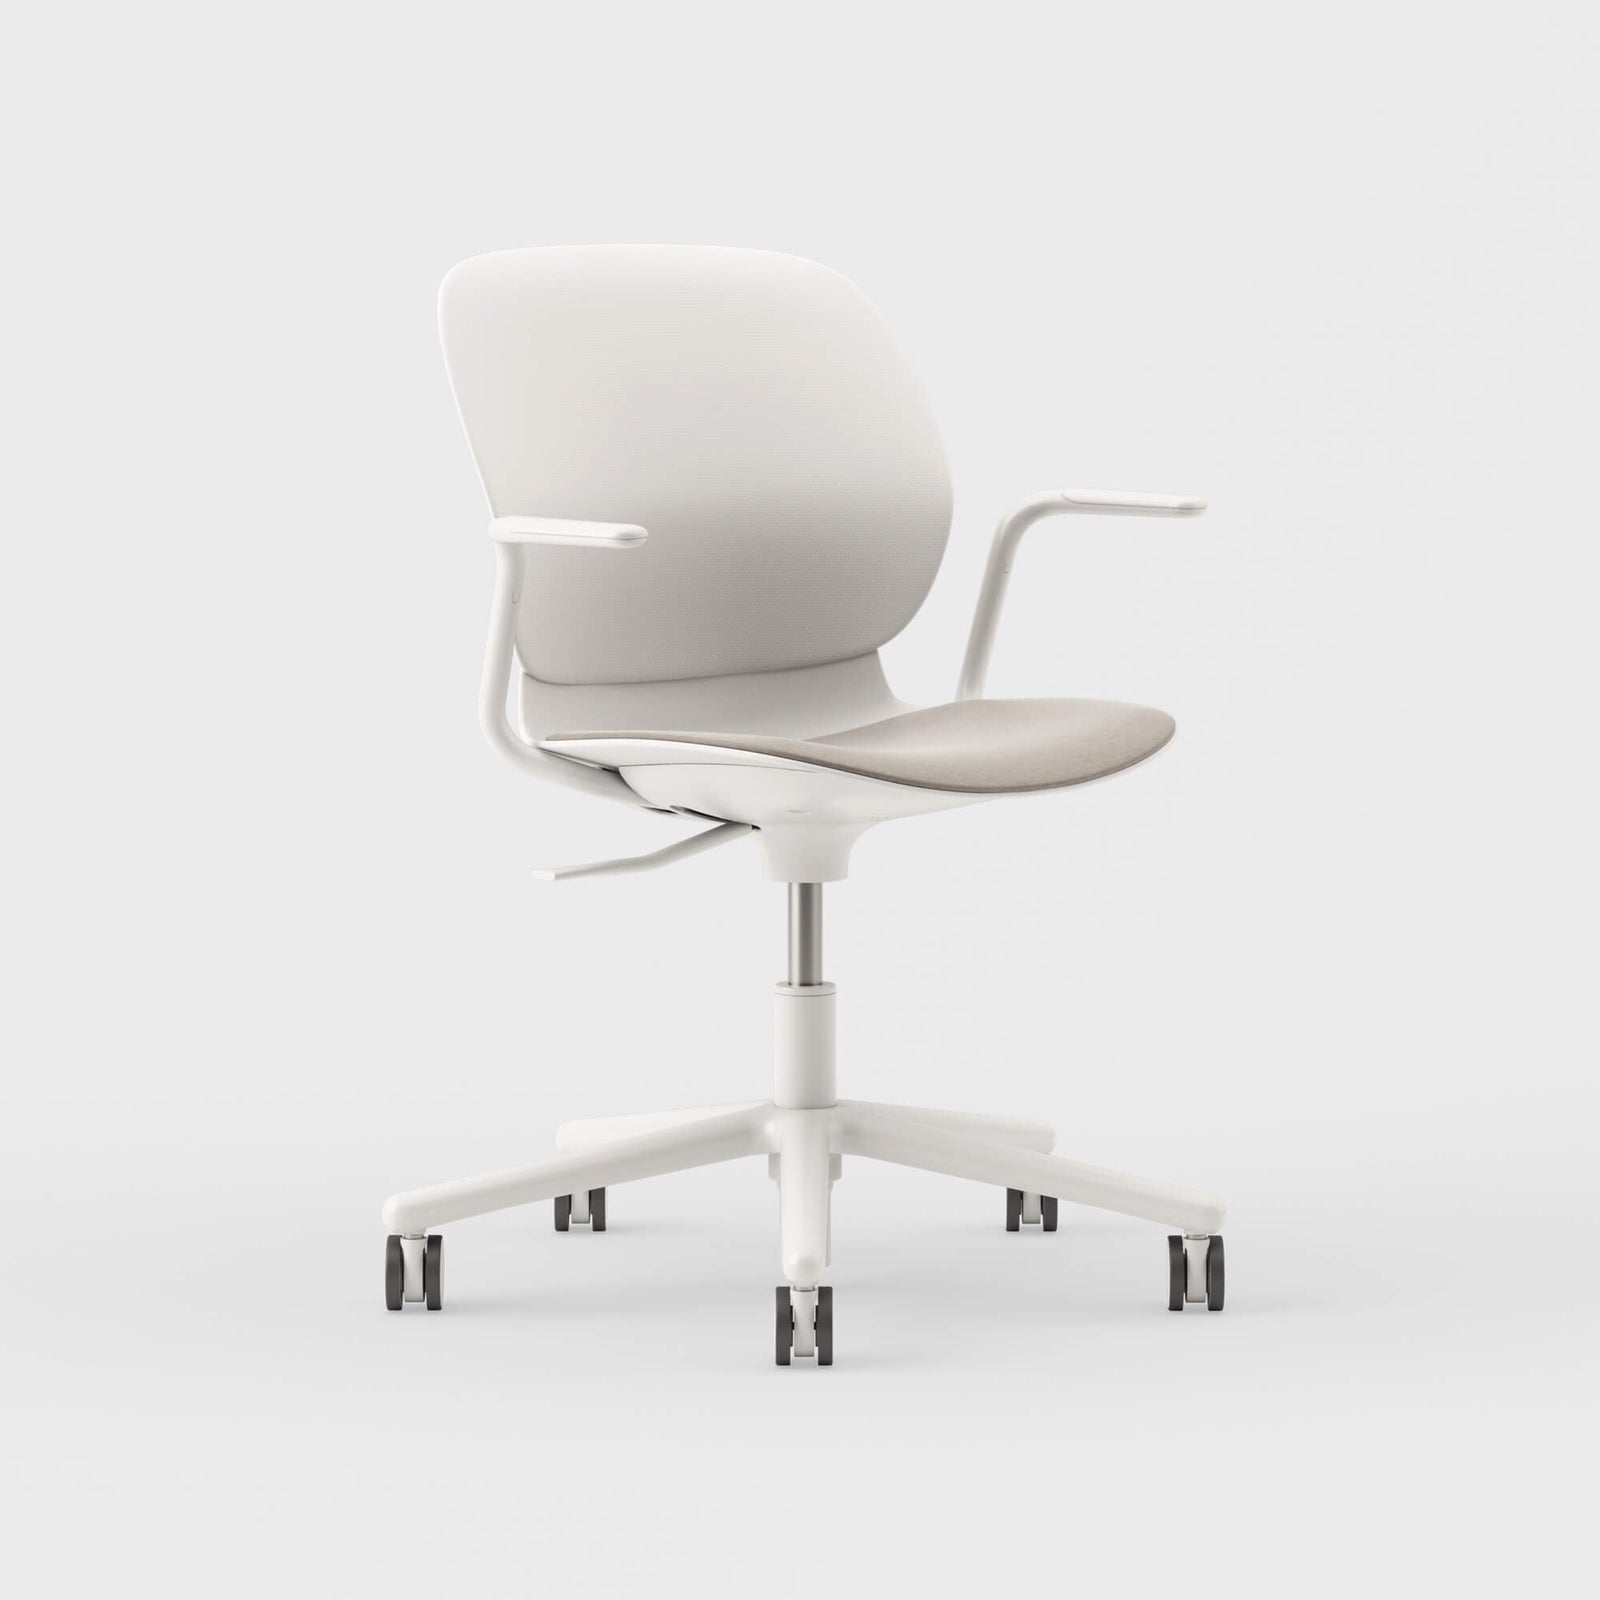 Maari Chair 5-Star Base with Upholstered Seat